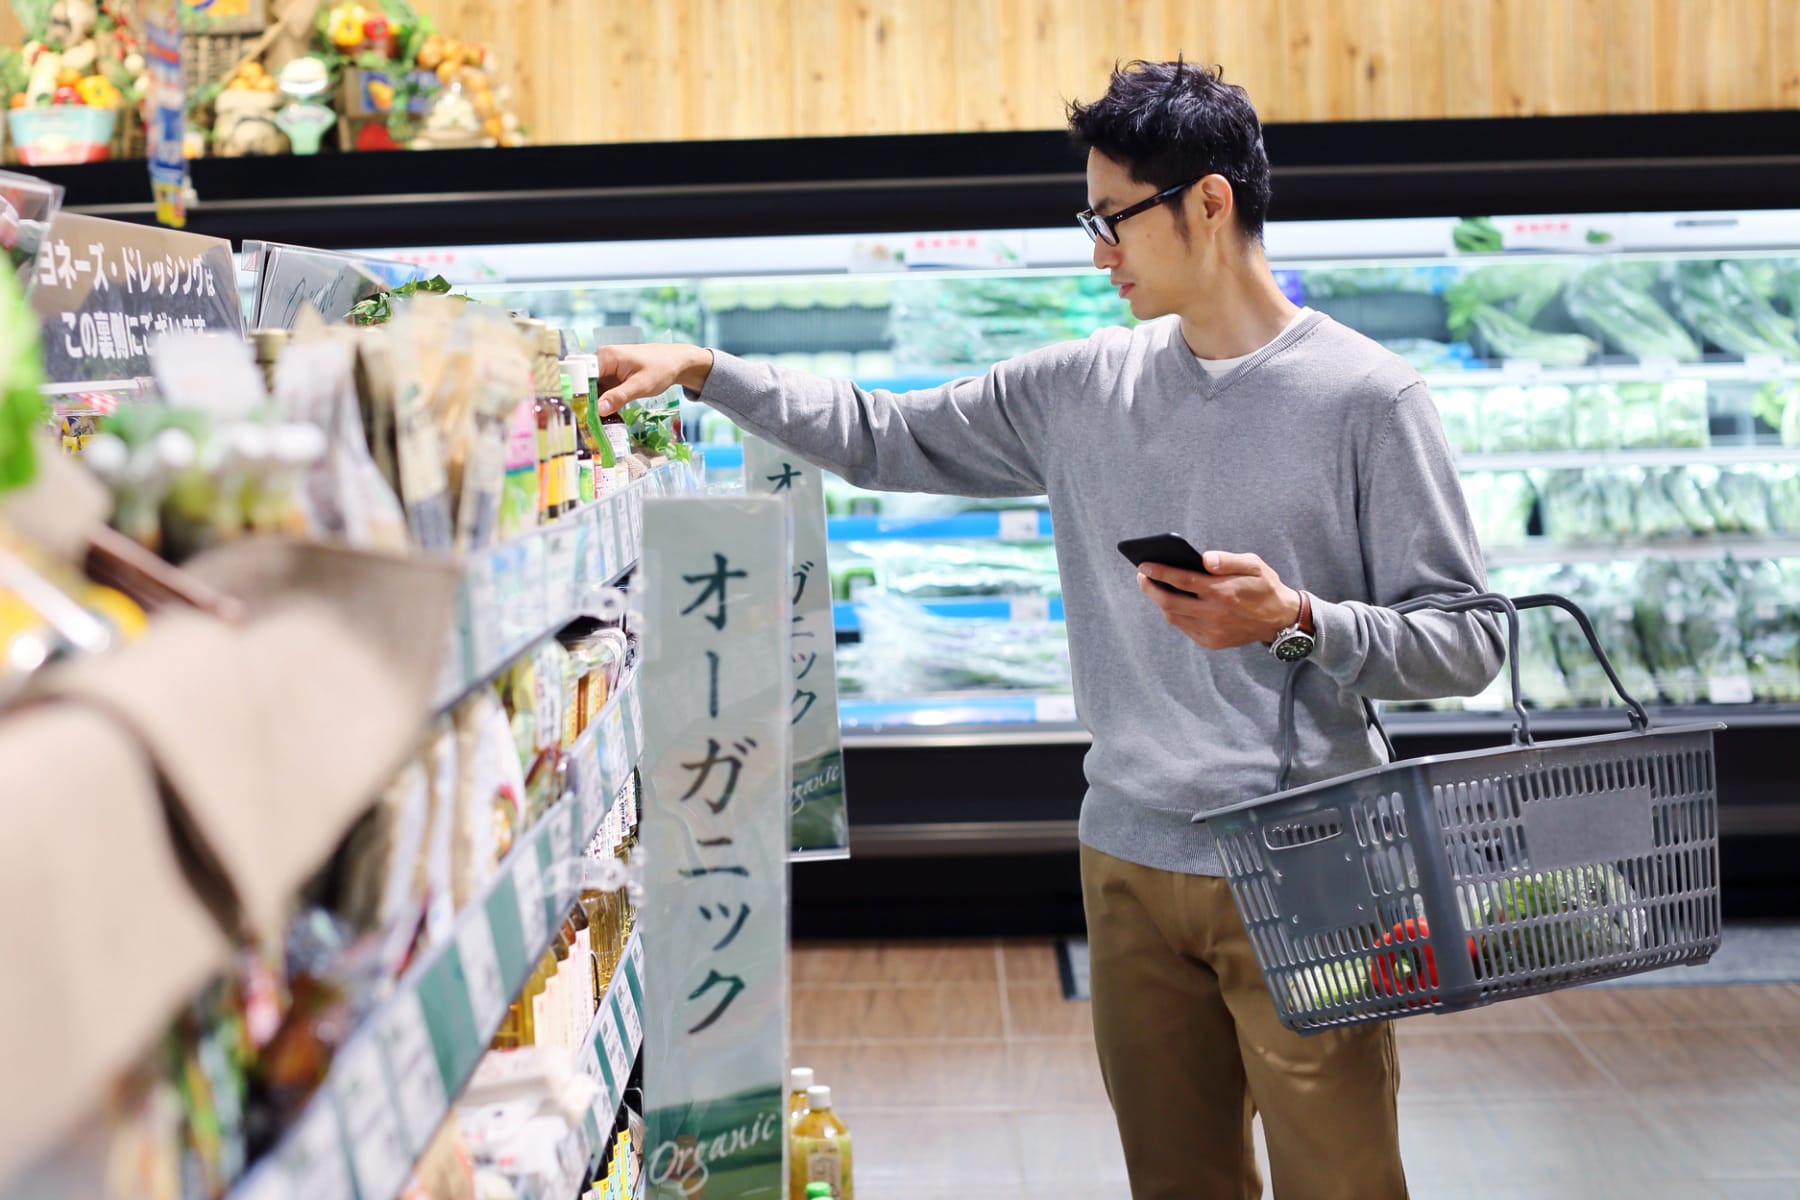 Man of Asian descent shops for groceries.